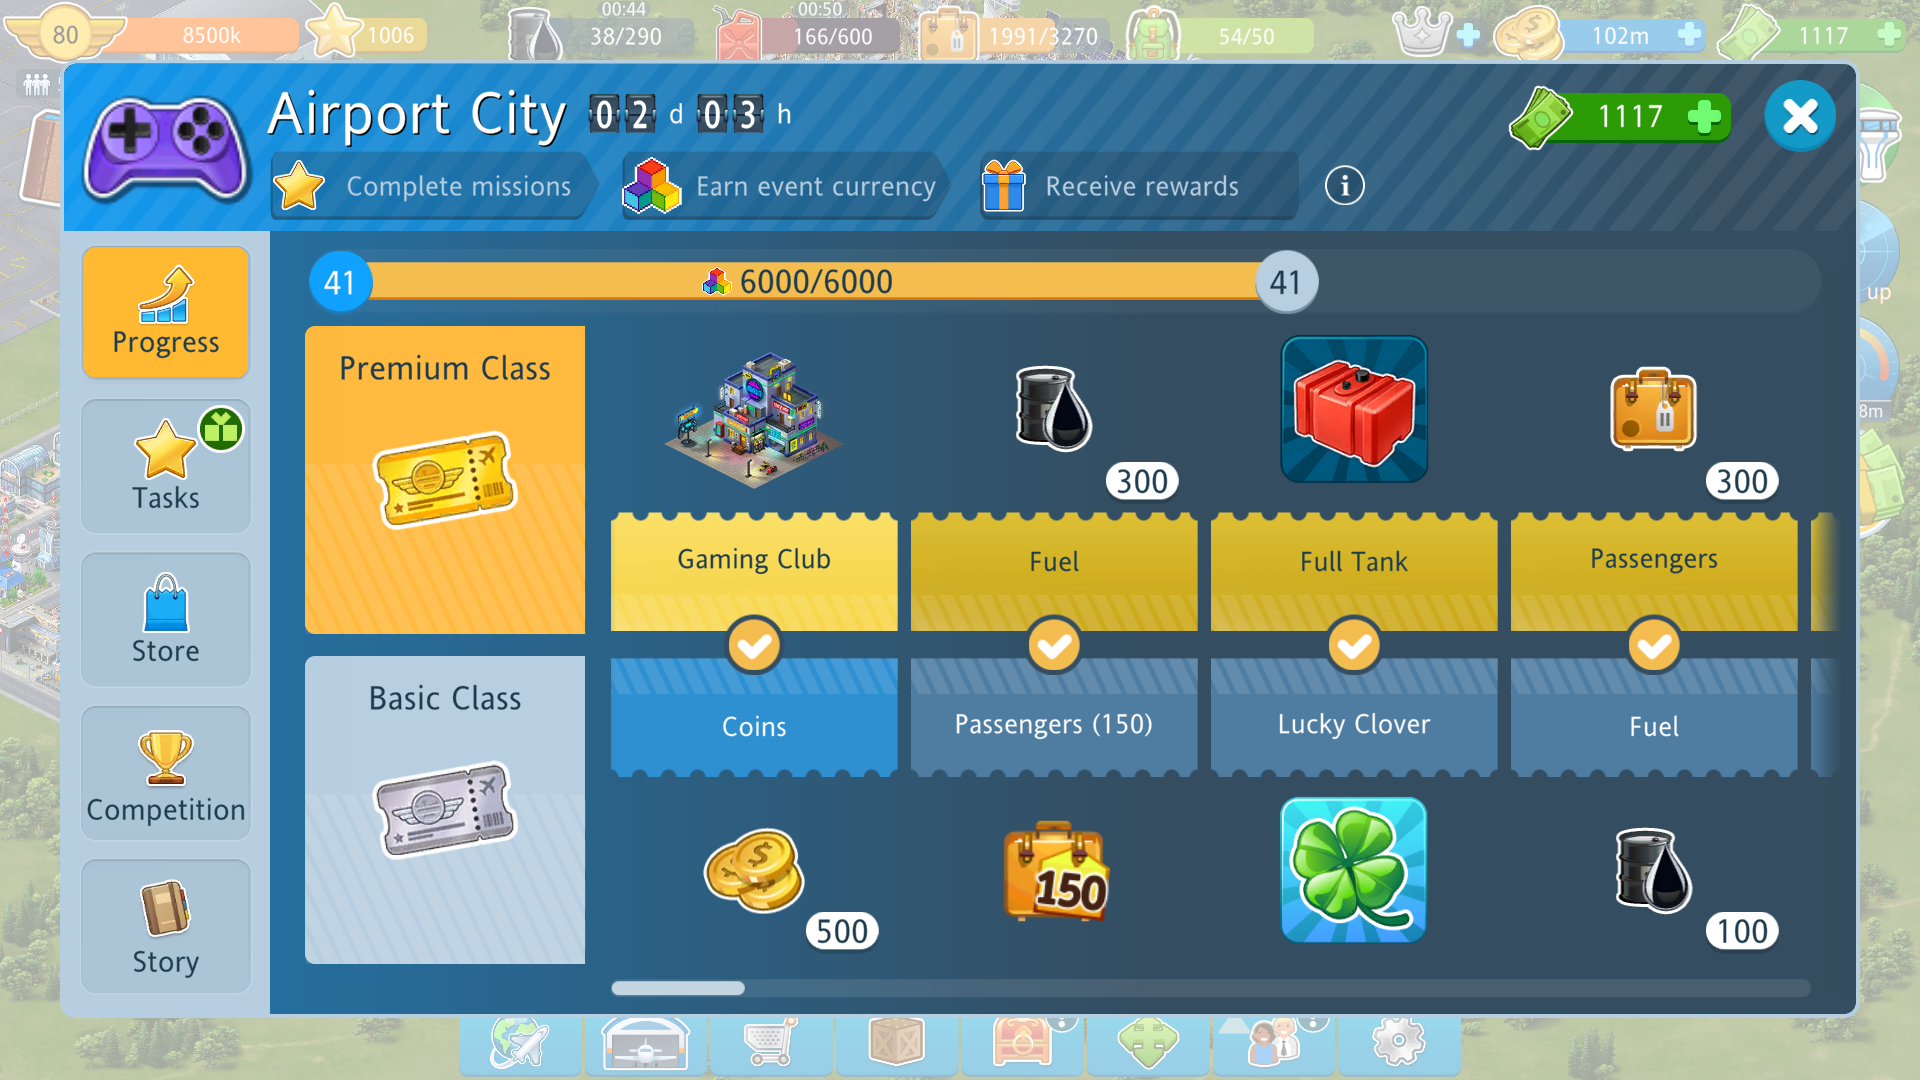 AirportCity2024_20ghozgdl_success_tasks.png